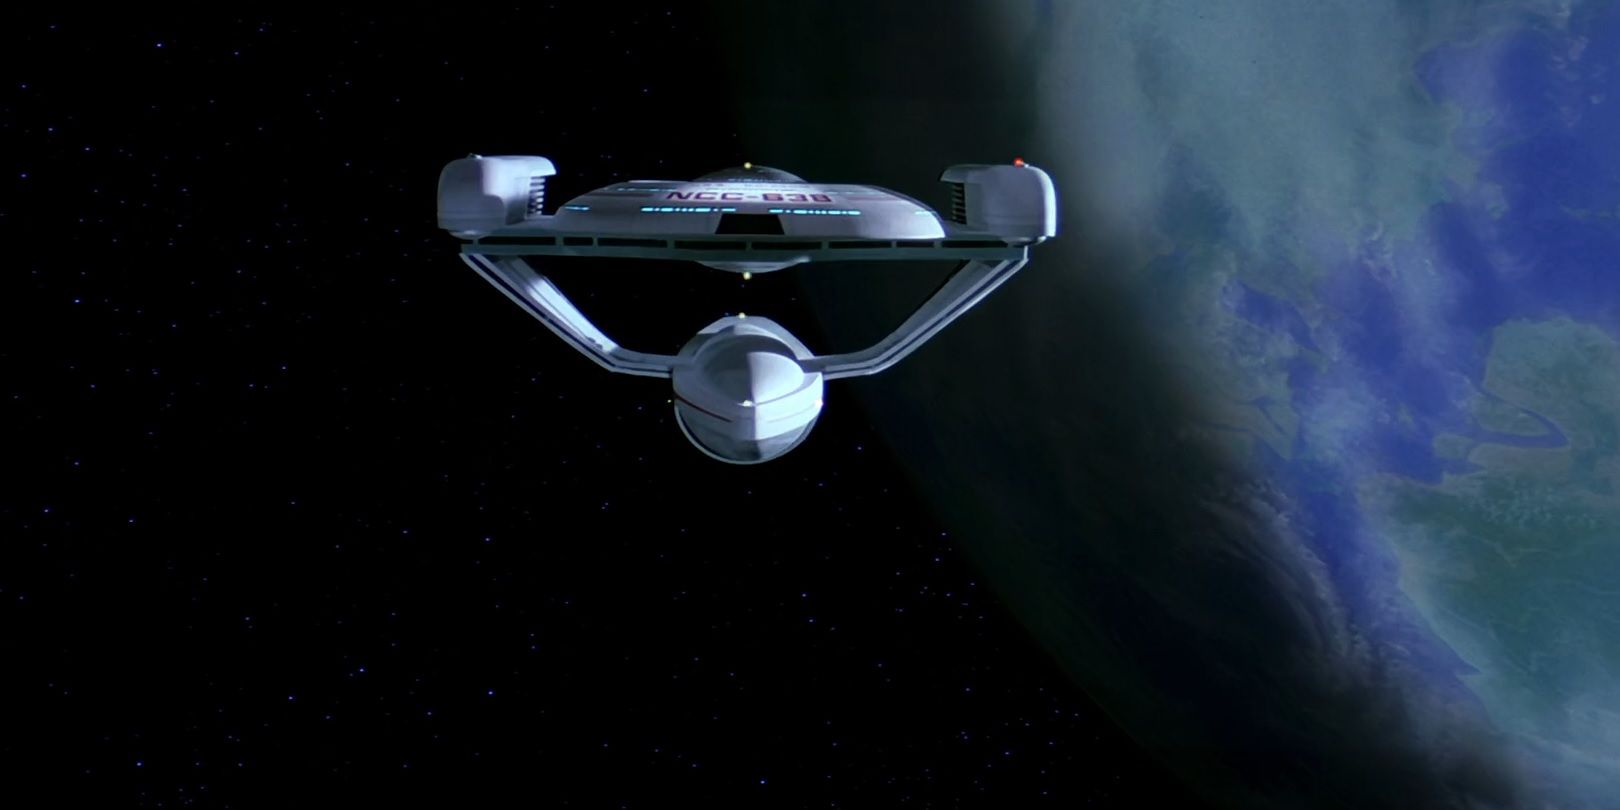 The USS Grissom orbits a planet in Star Trek III: The Search For Spock.